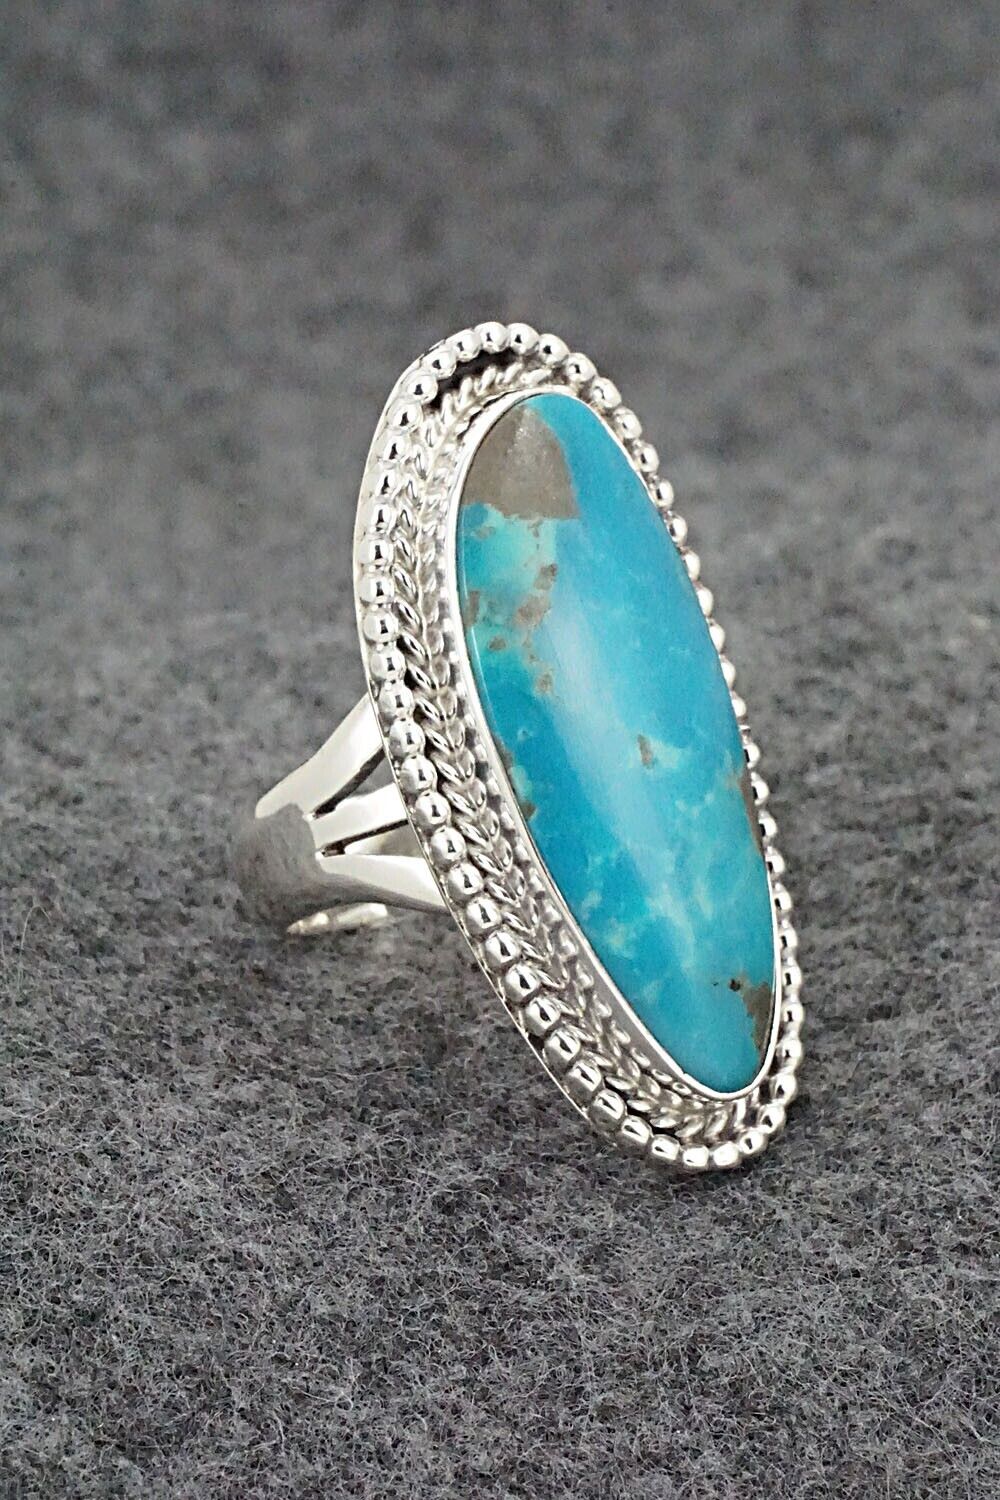 Turquoise & Sterling Silver Ring - Andrew Vandever - Size 8